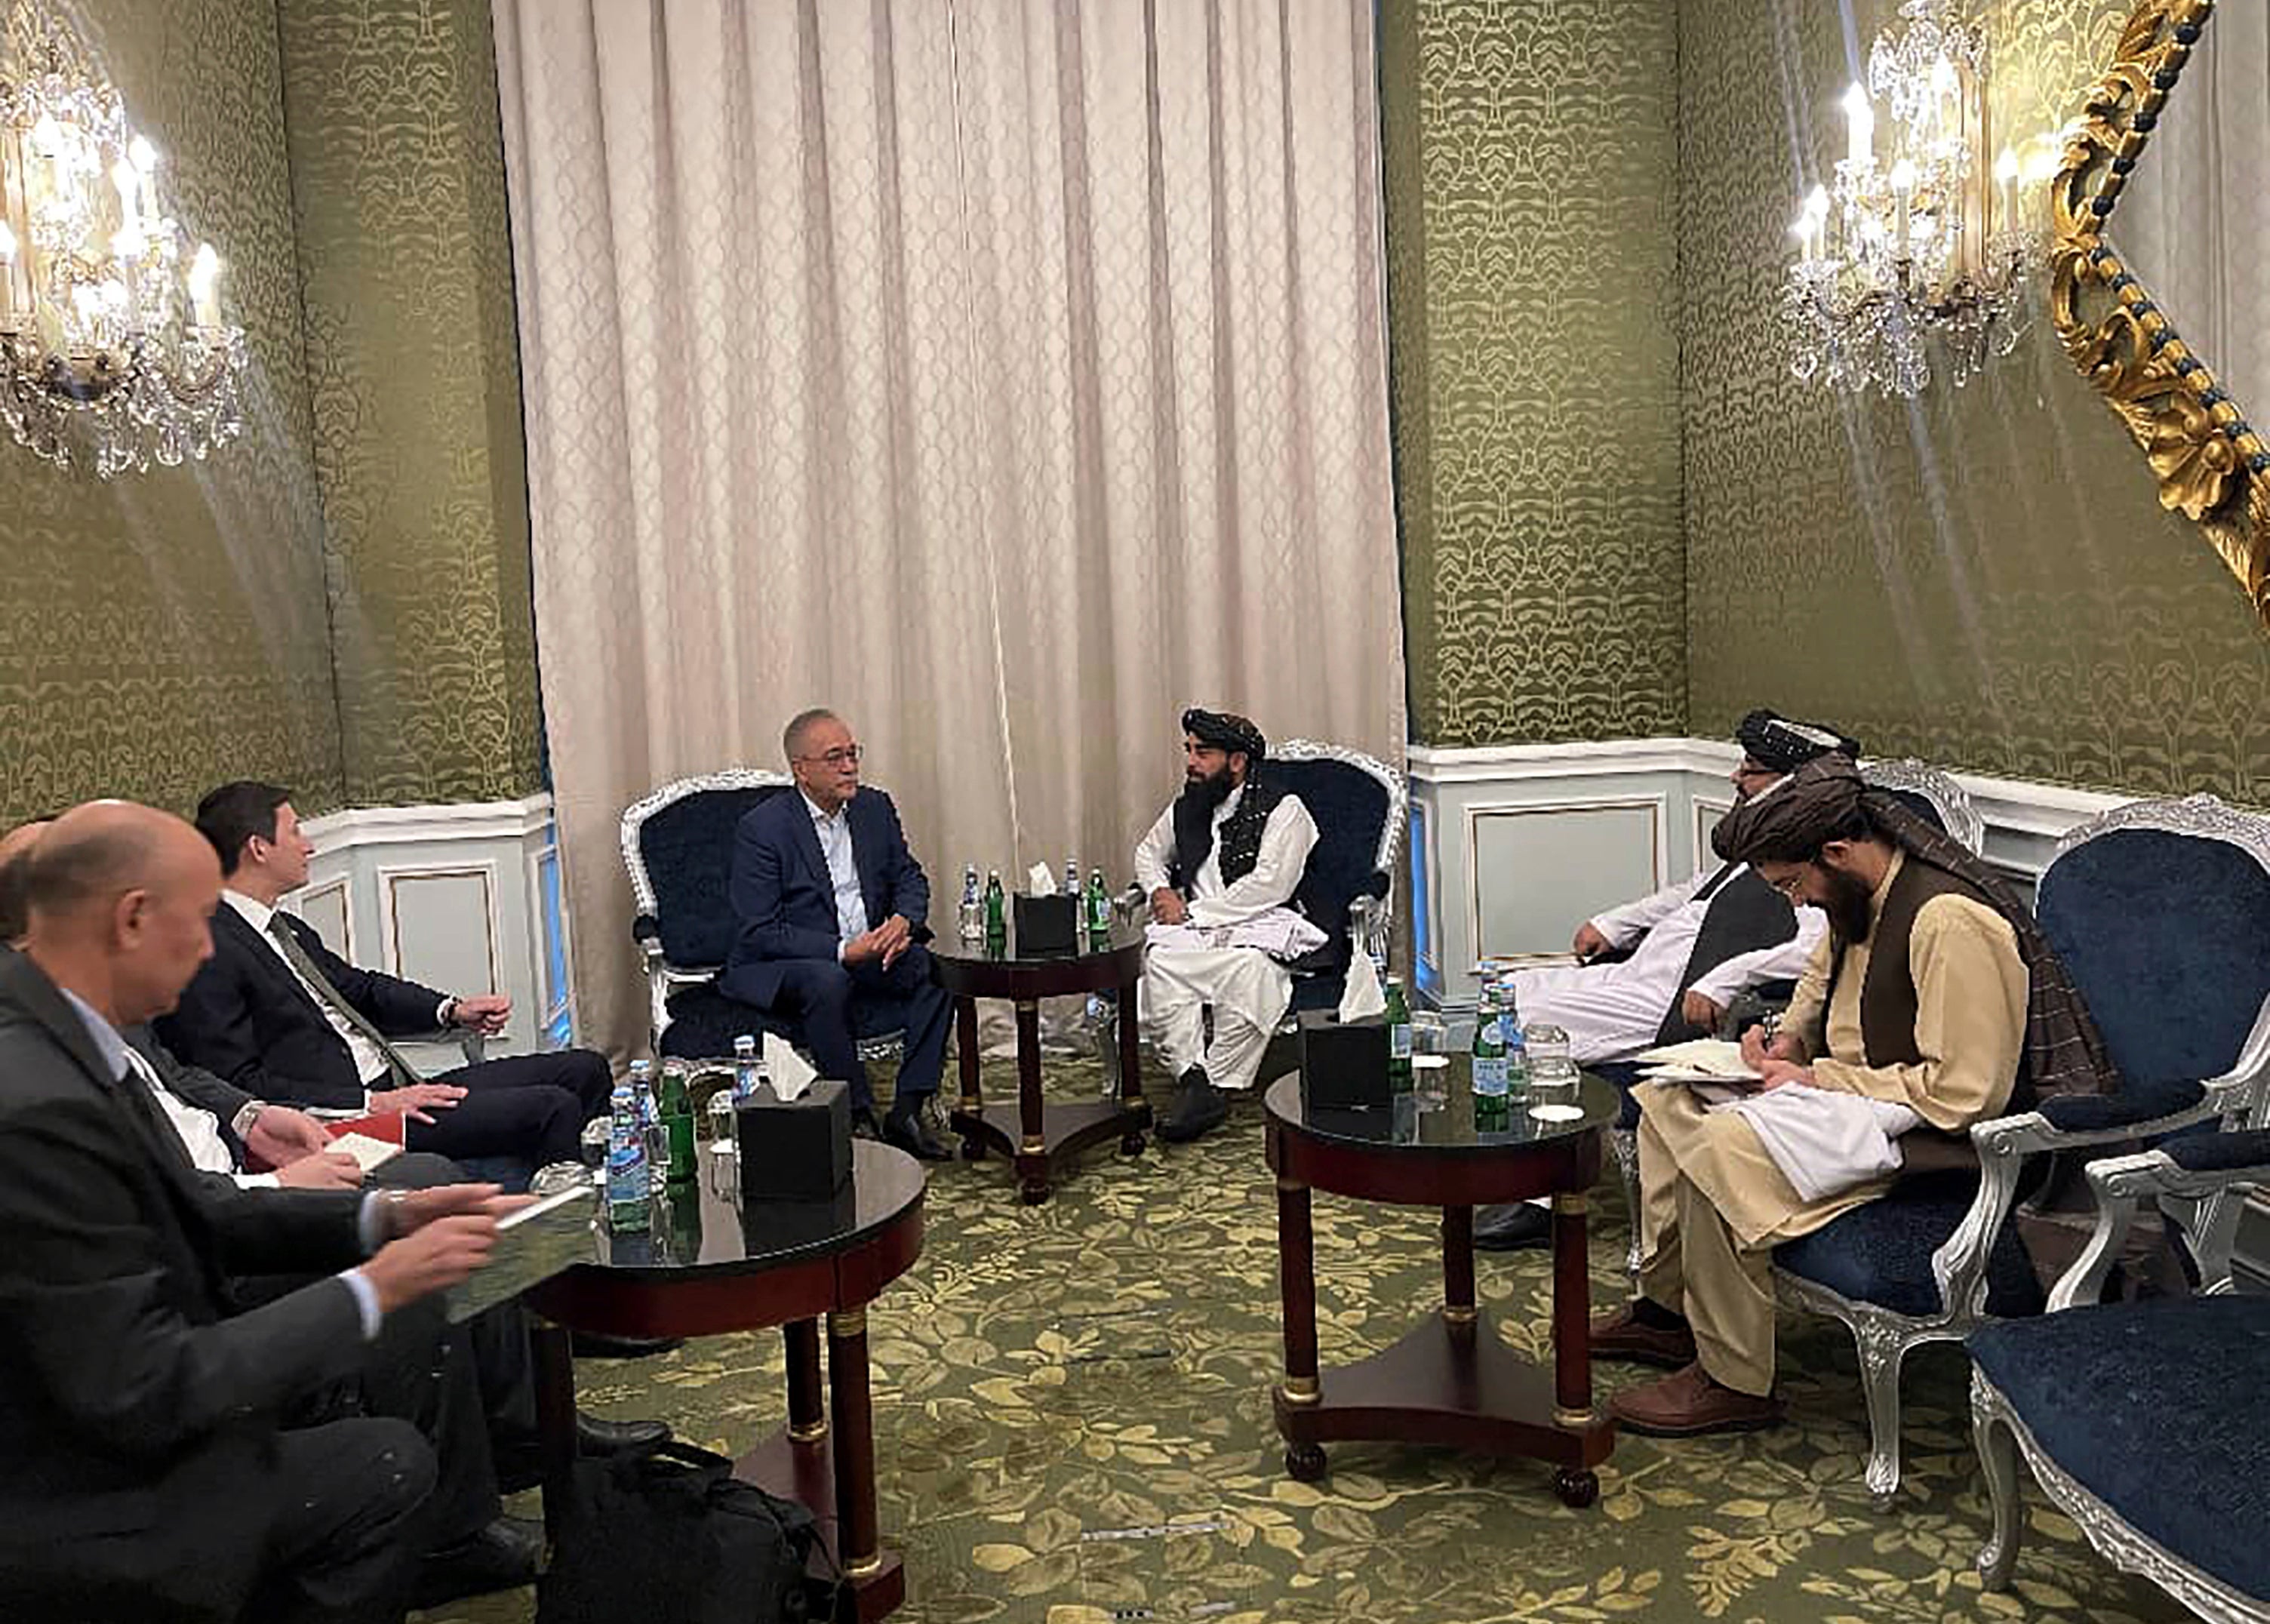 Zabihullah Mujahid, the chief spokesman for the Taliban government speaks with Uzbekistan Presidential Envoy to Afghanistan Ismatullah Irgashev in Doha, Qatar